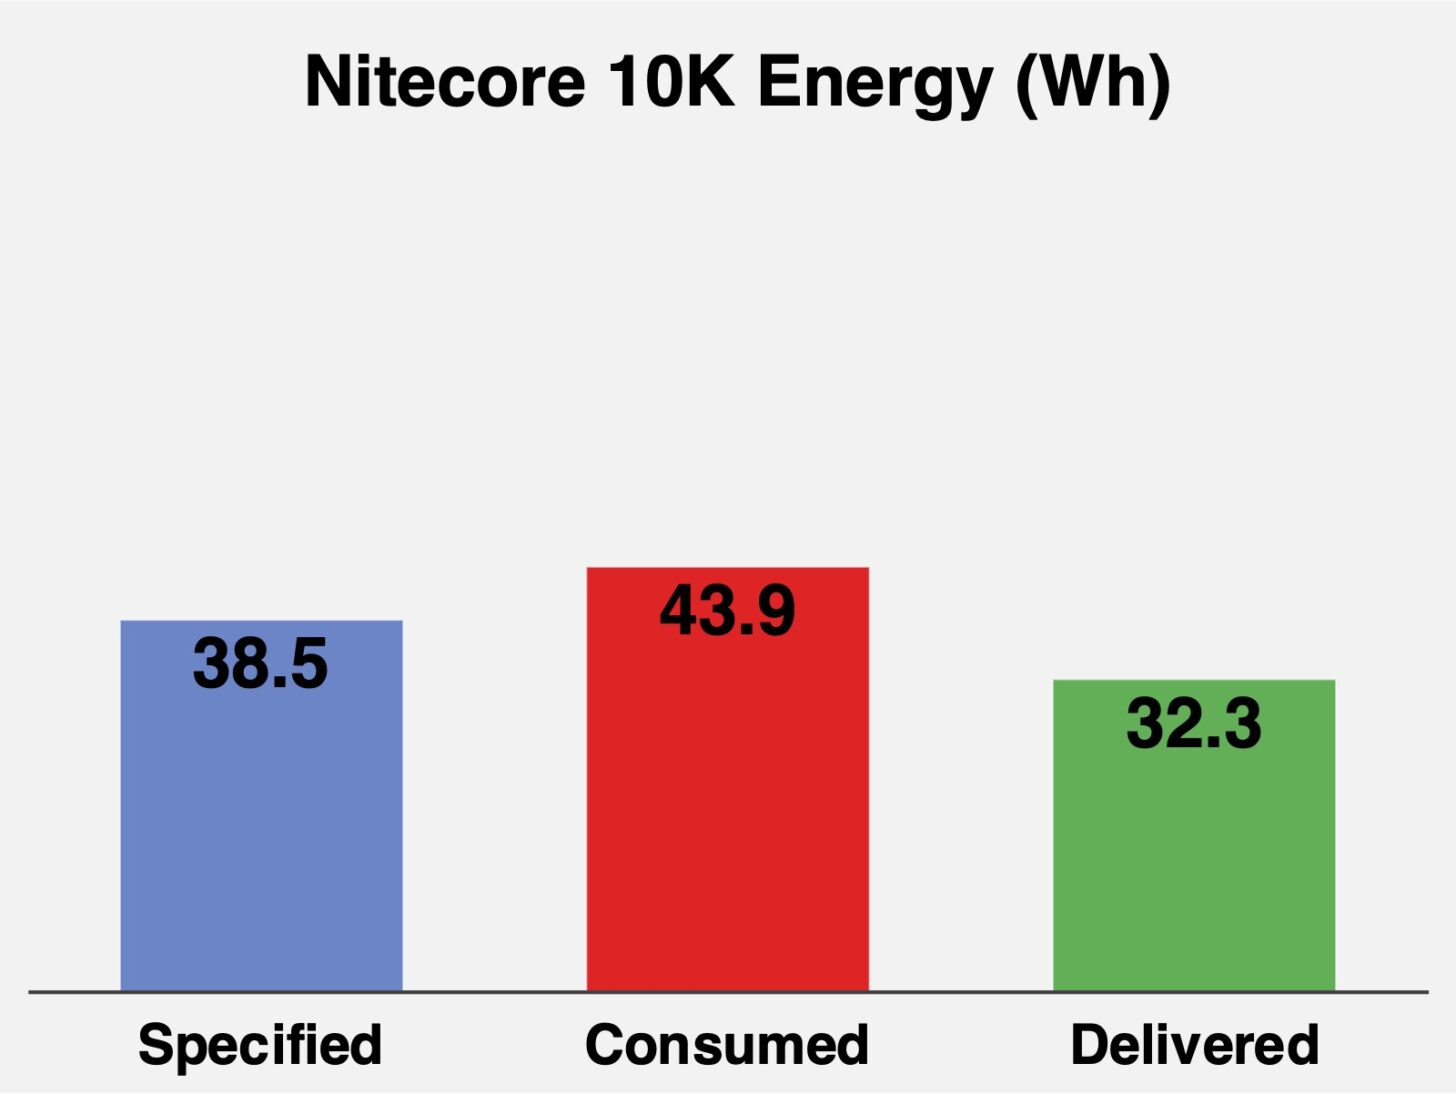 Chart comparing Nitecore 10K specified, consumed, and delivered energy, in watt-hours.